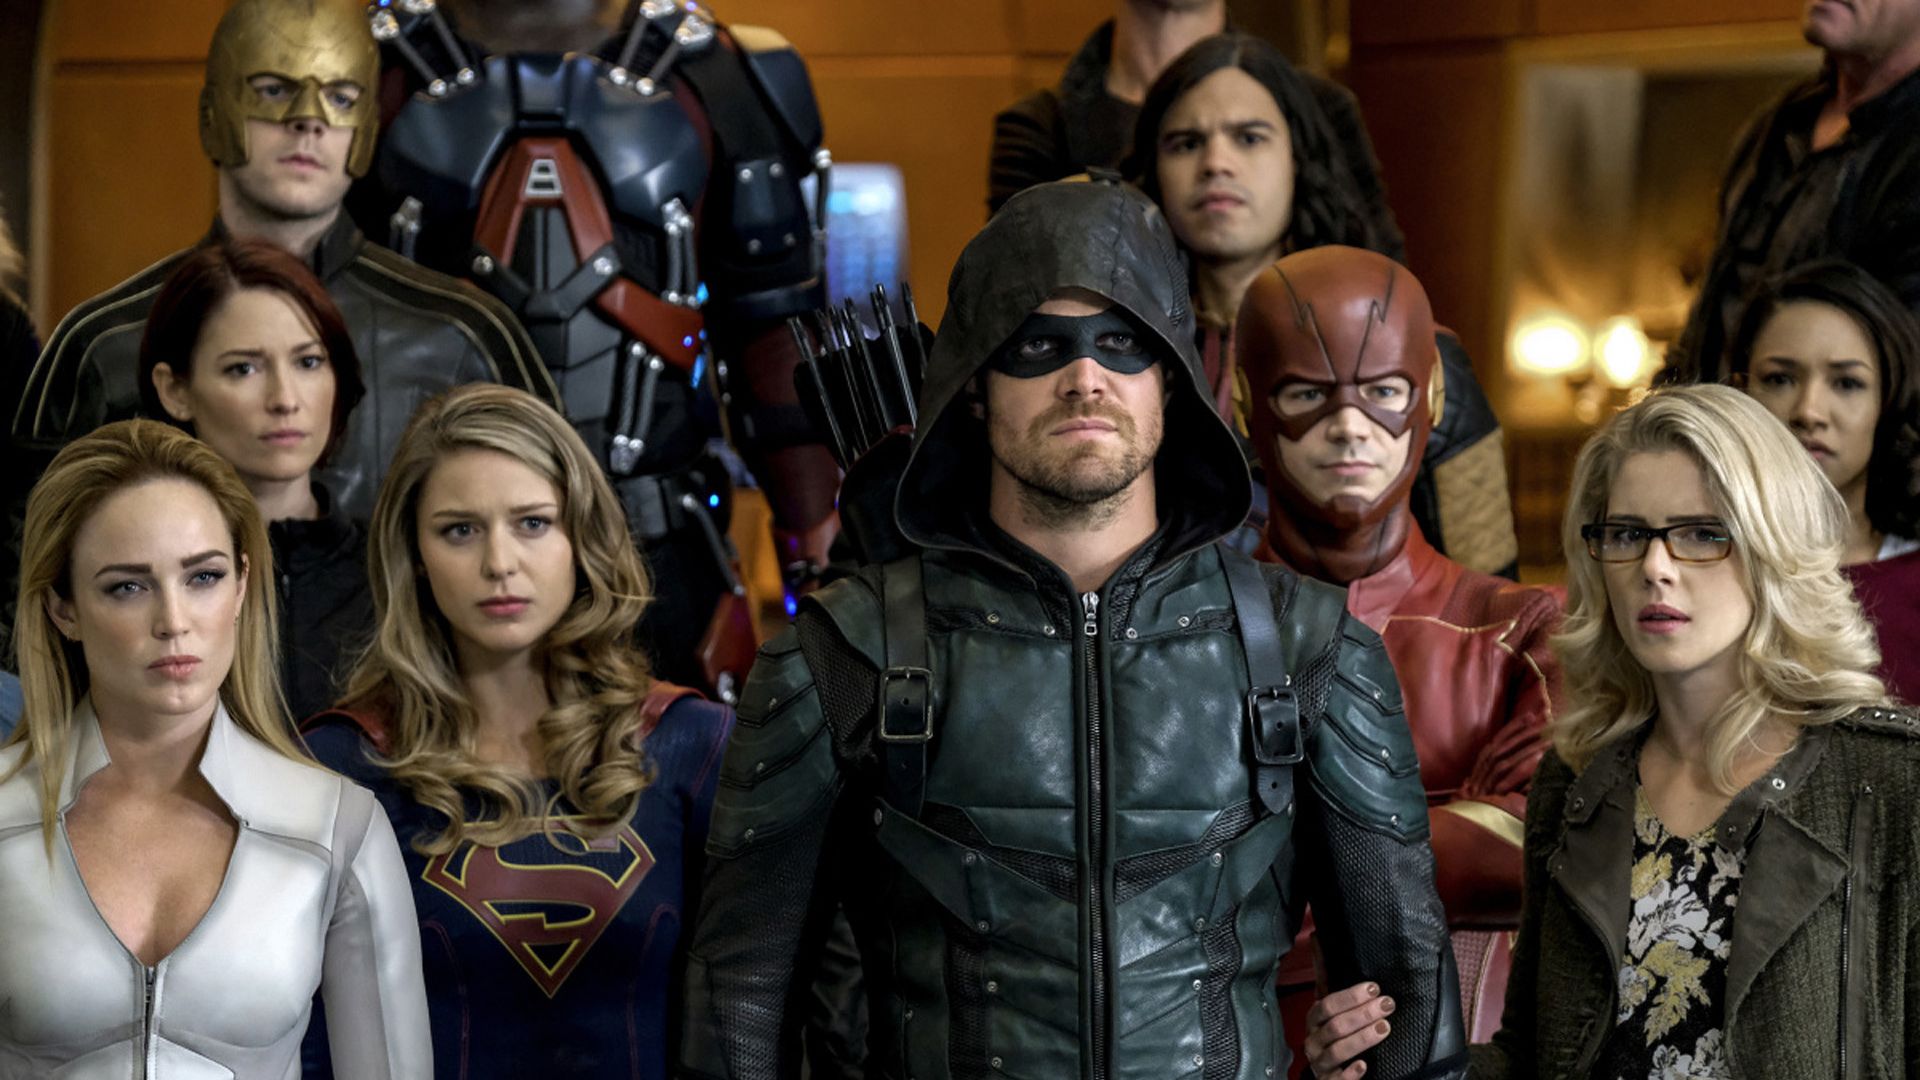 Desktop Wallpaper Supergirl, Arrow, The Flash, And Legends Of Tomorrow, Crossover, Tv Series, HD Image, Picture, Background, A1cbae